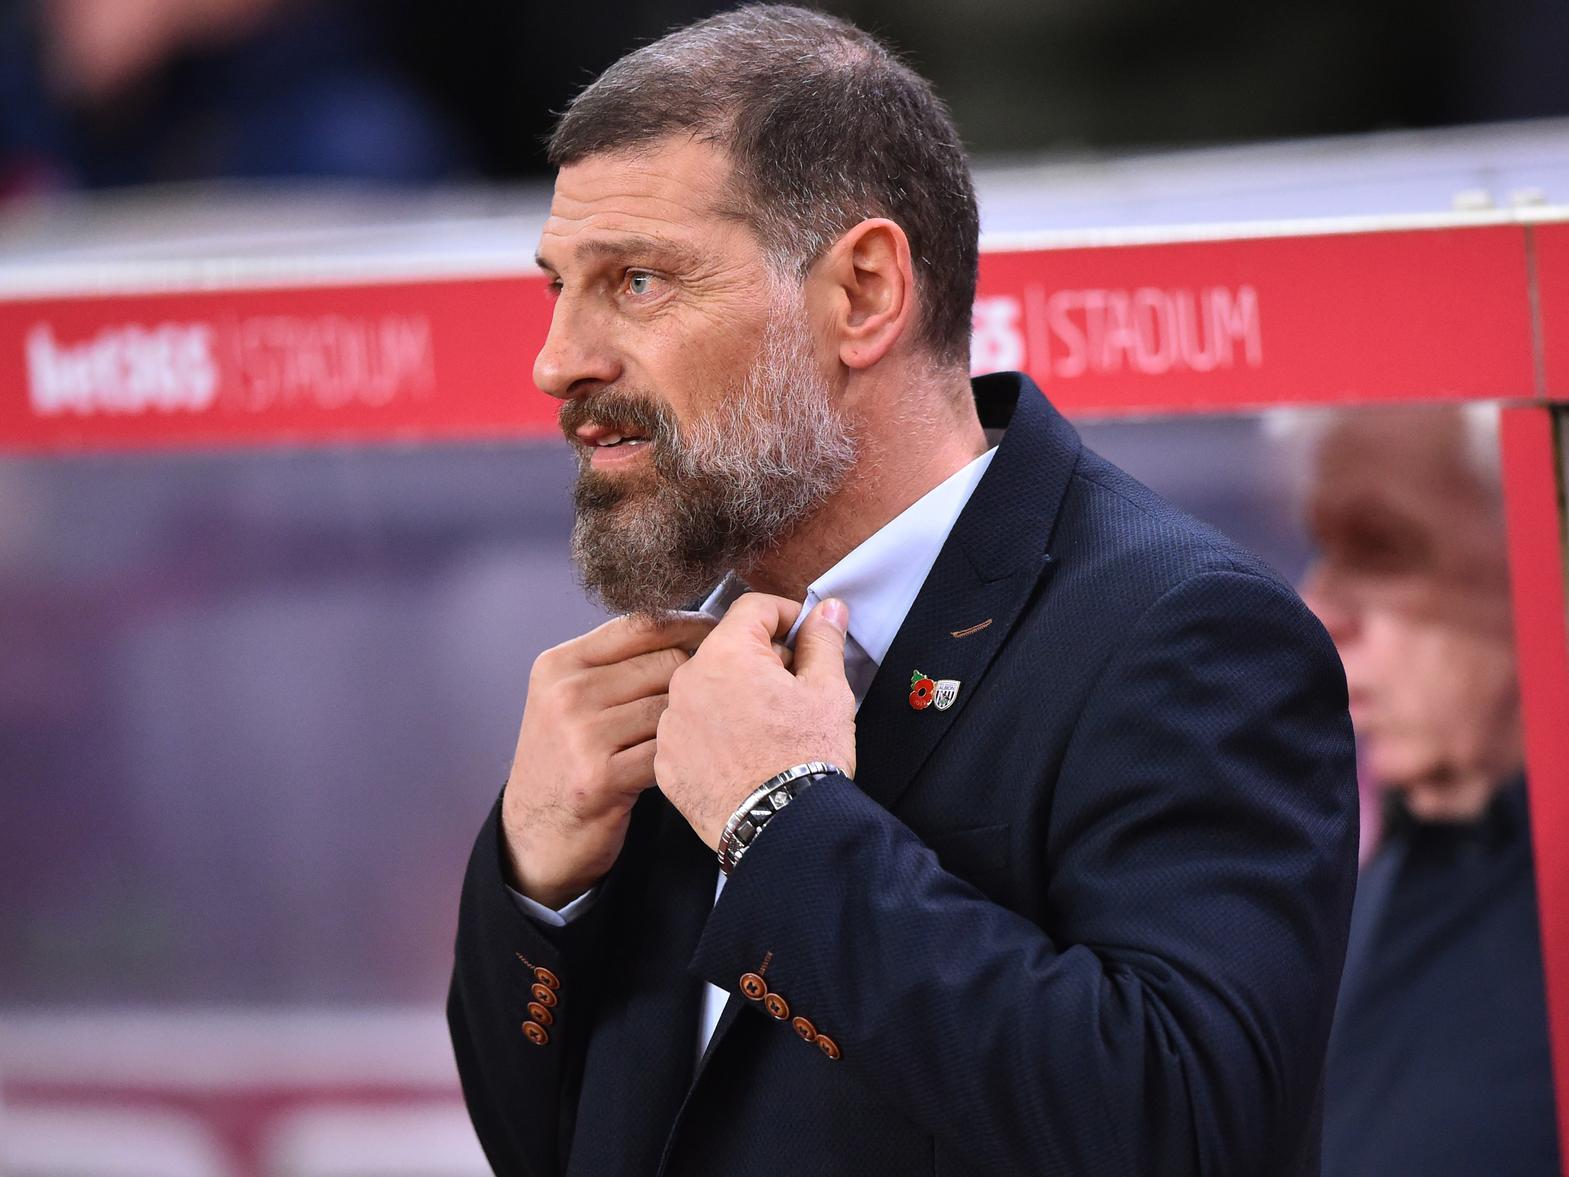 West Bromwich Albion boss Slaven Bilic has claimed his side are under high pressure due to being top of the table, while those below them can enjoy "dreaming" of catching them. (Express & Star)